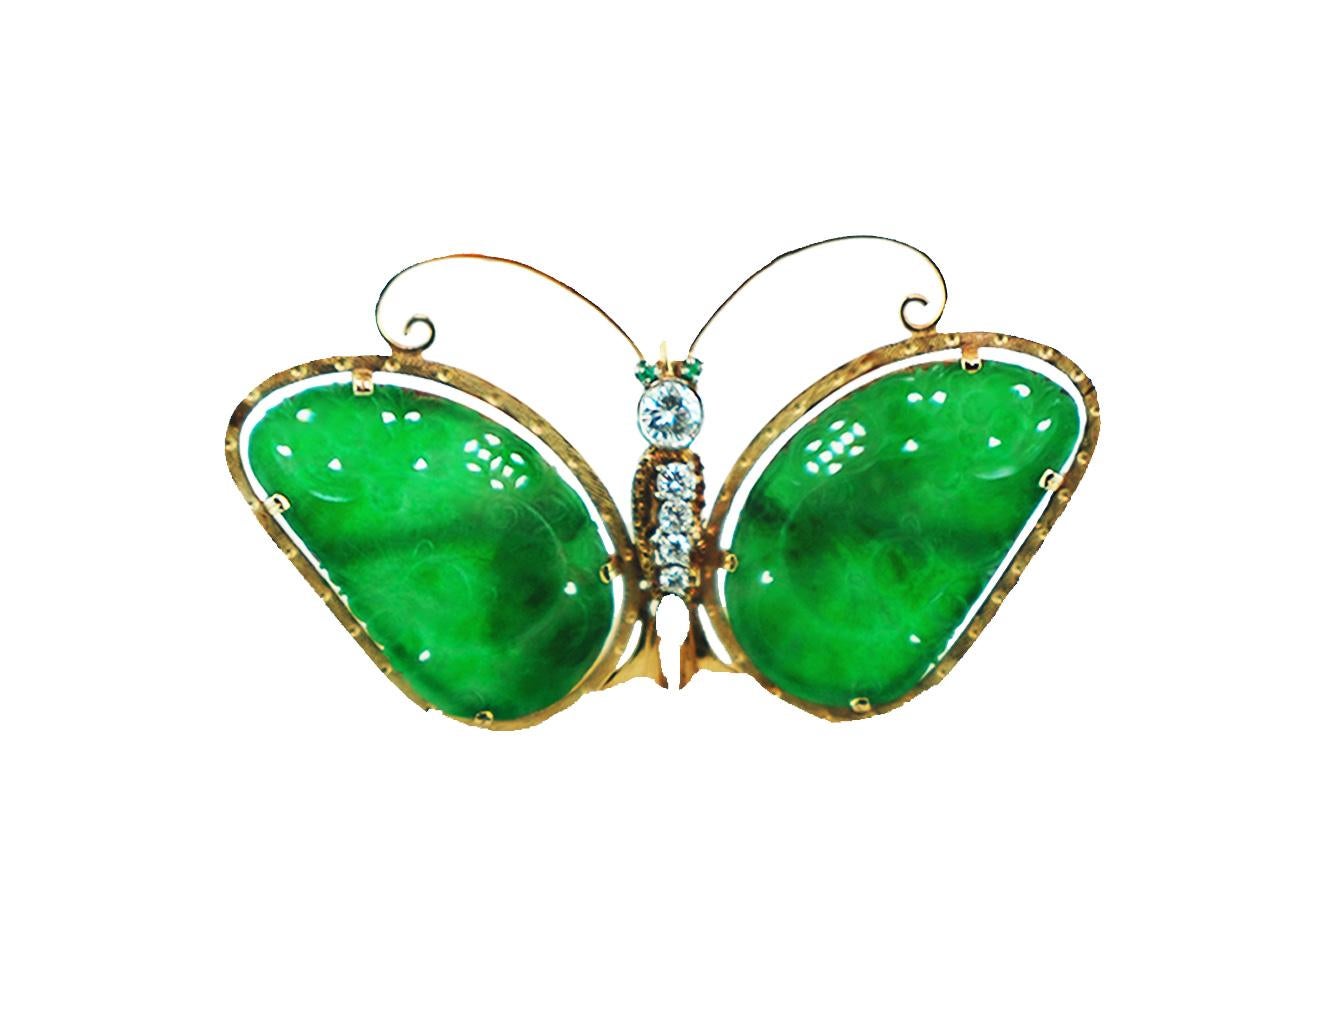 Jadeite and Diamond Butterfly Pin or Brooch with beautiful quality diamonds and emerald gemstone antenna
Spectacular colored green jadeite is carved into a butterfly pendant or brooch and expands over 2.75 inches wide and 1.75 inches tall. 
The